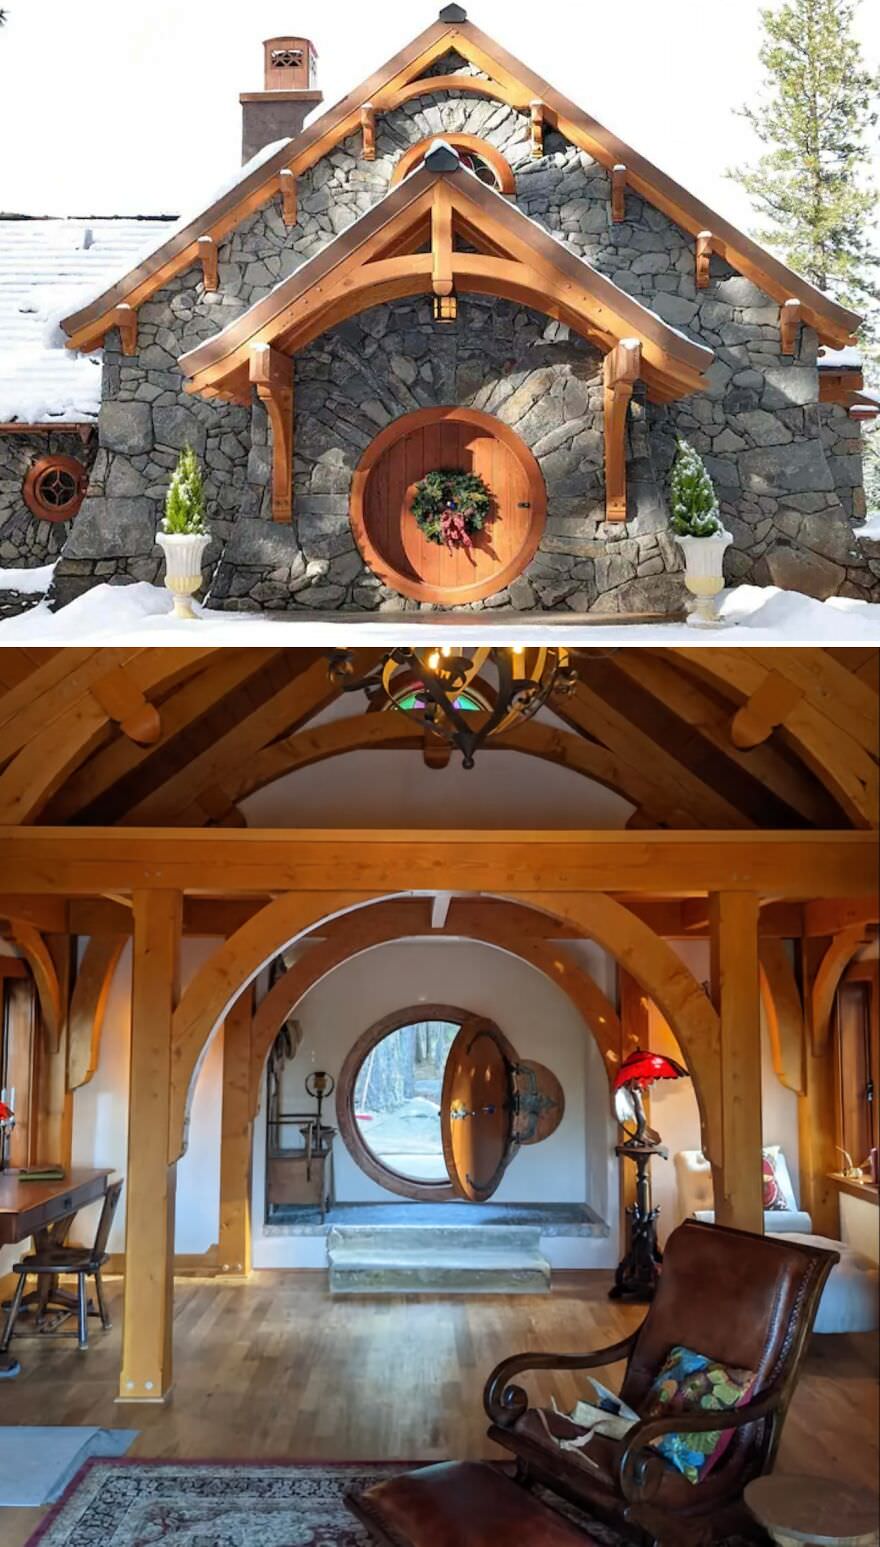 This real-life Hobbit house is amazing.